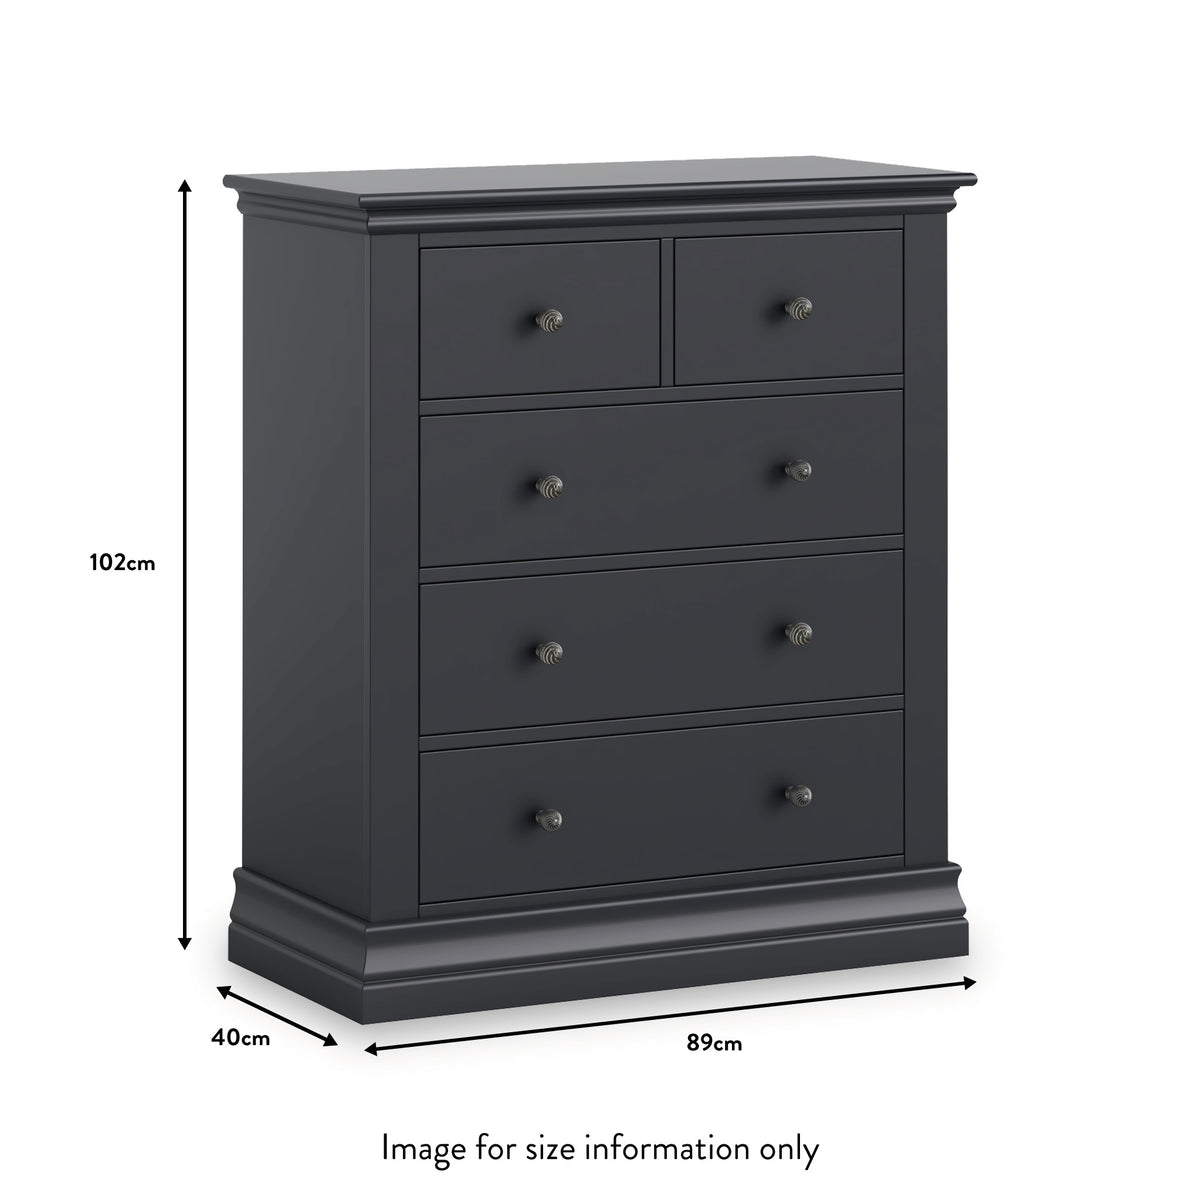 Porter Charcoal 2 Over 3 Chest of Drawers dimensions